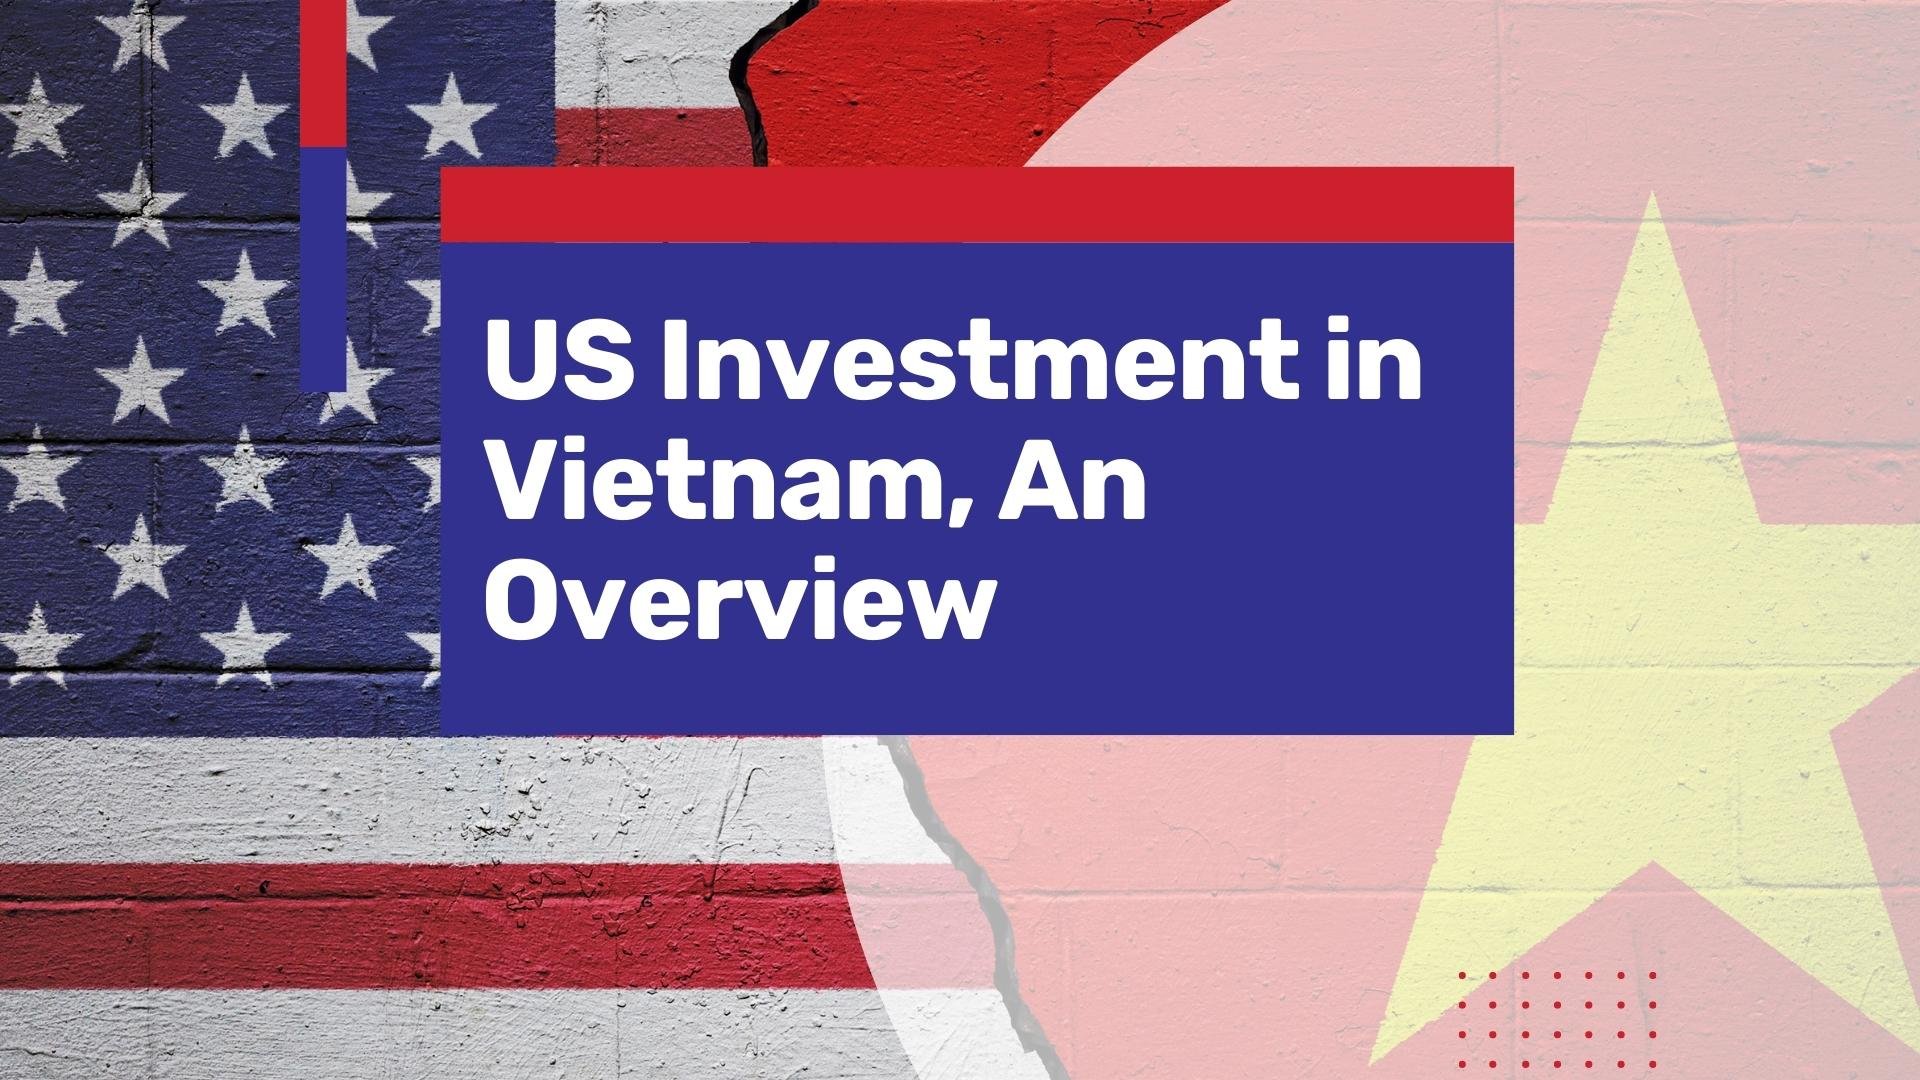 Updates on US investments in Vietnam, a Surprisingly Fruitful Partnership